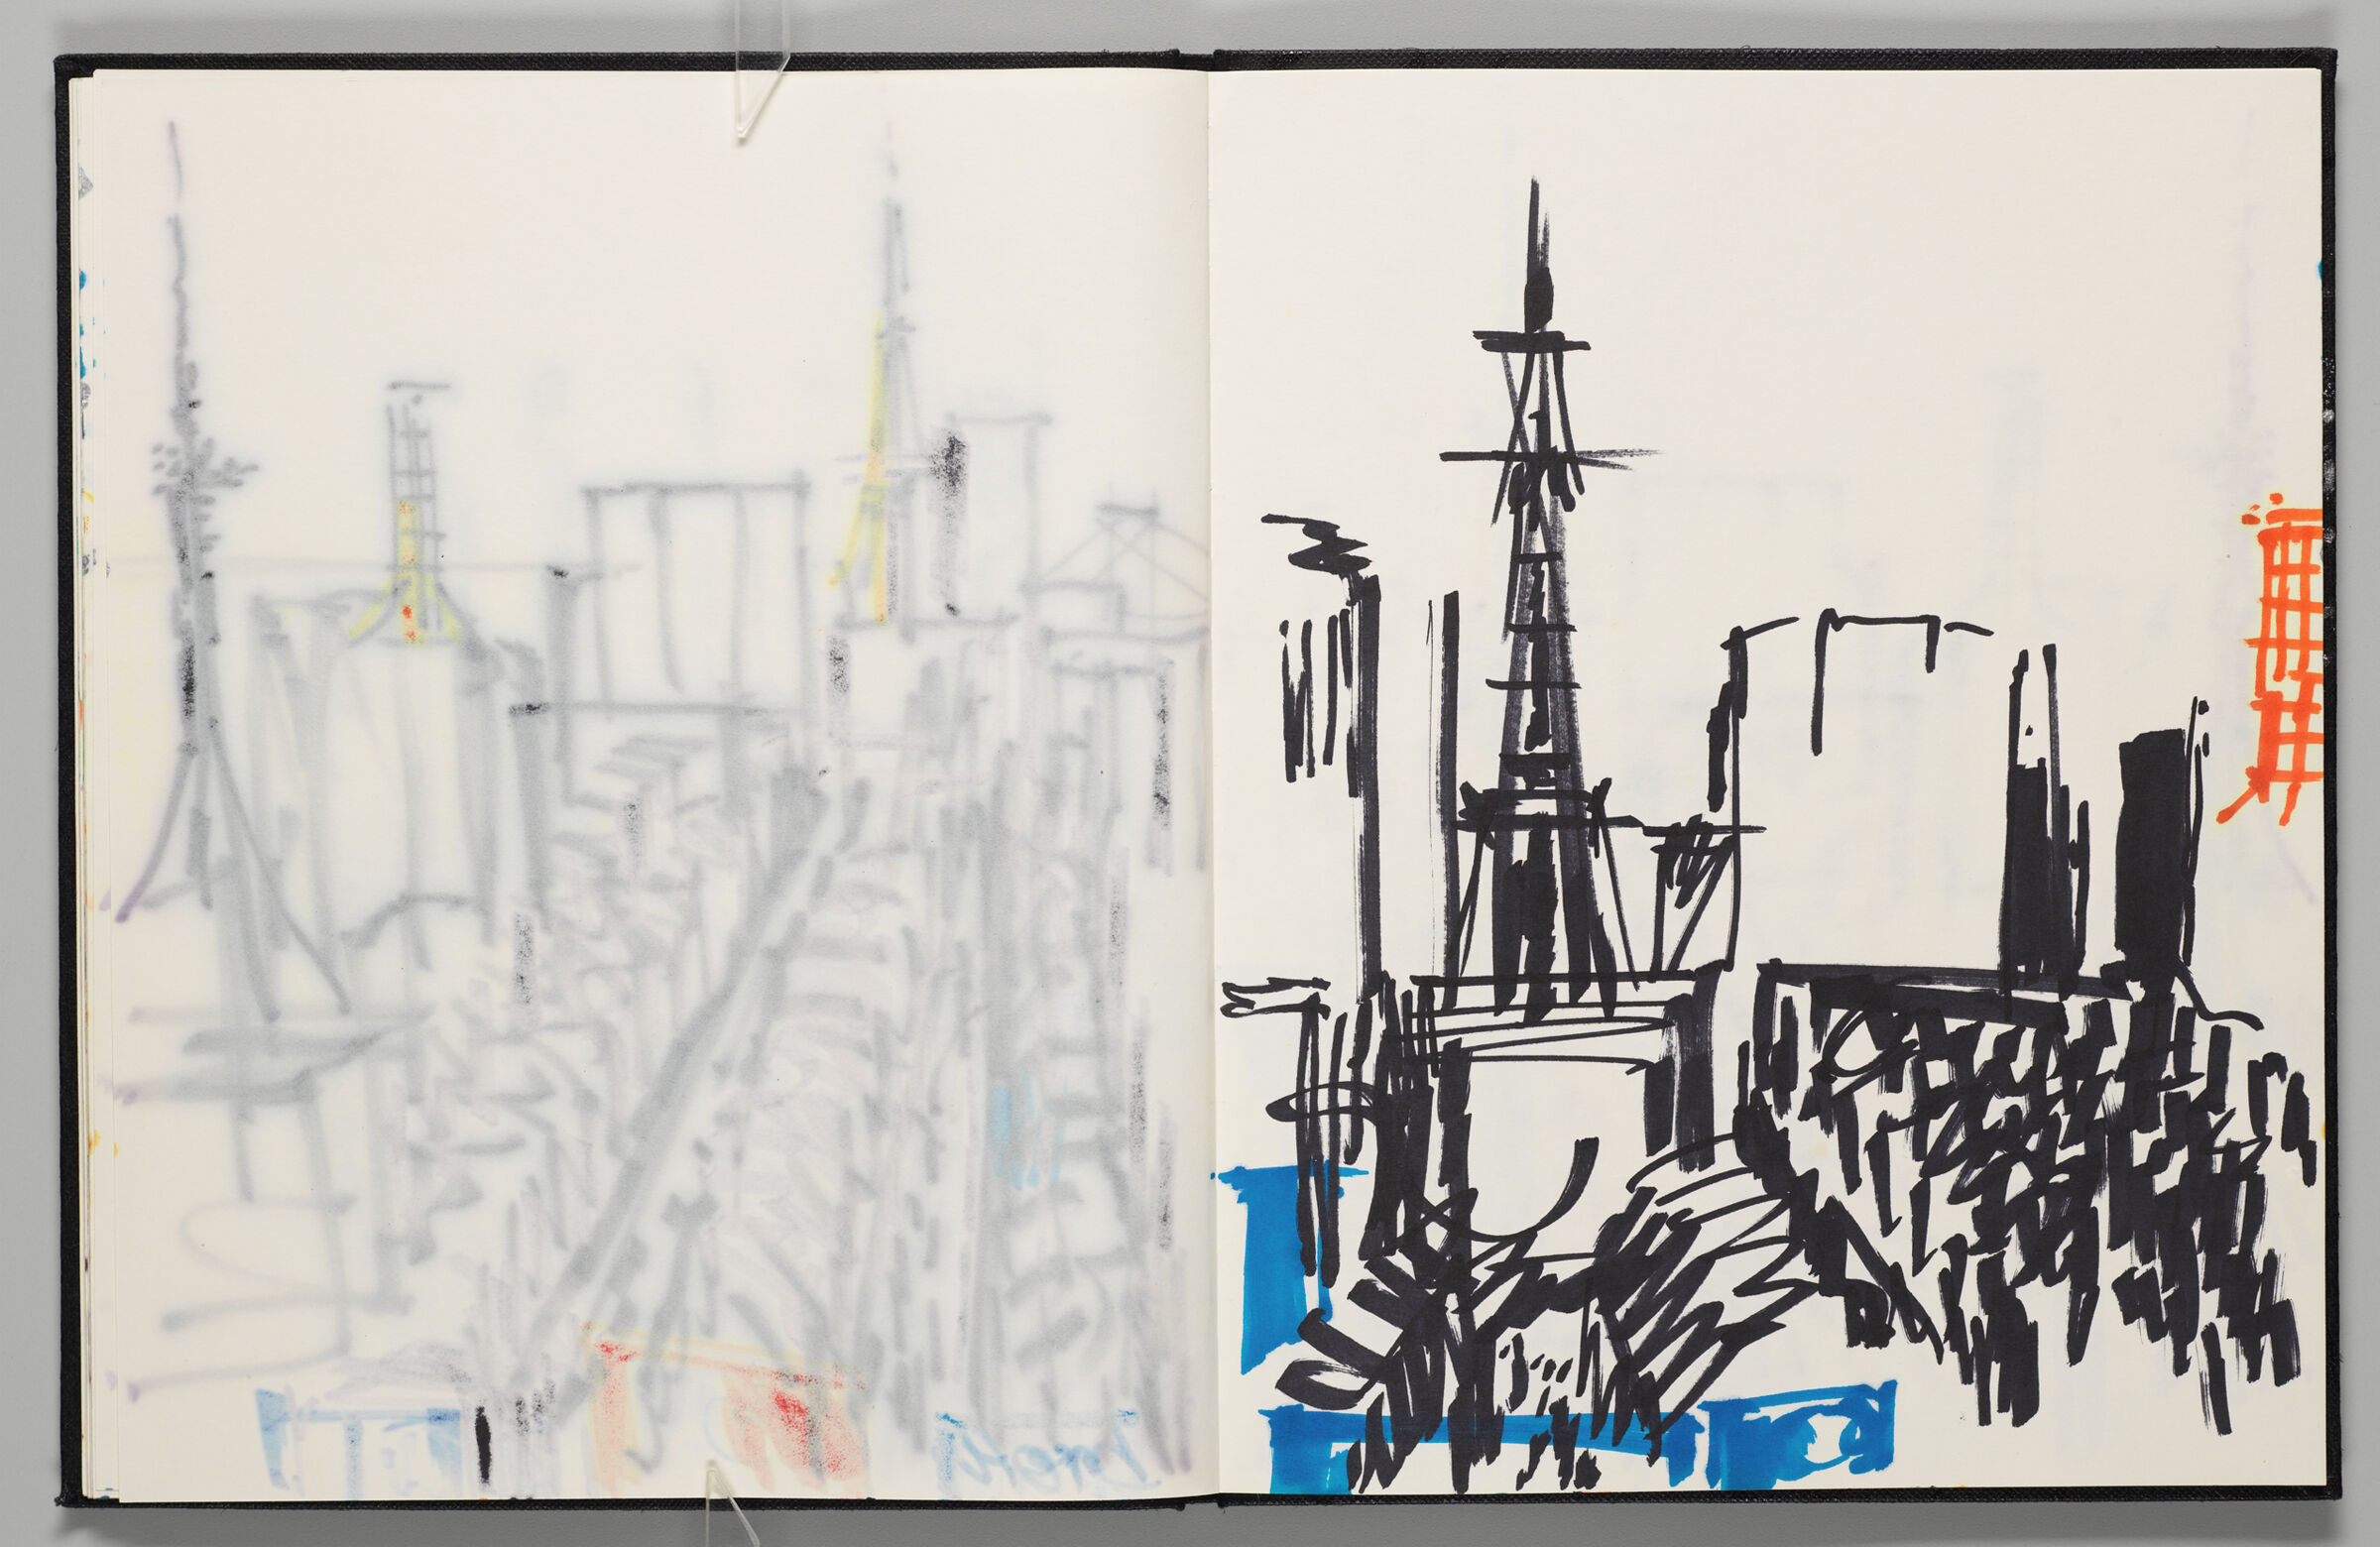 Untitled (Bleed-Through Of Previous Page, Left Page); Untitled (Tokyo Cityscape, Right Page)